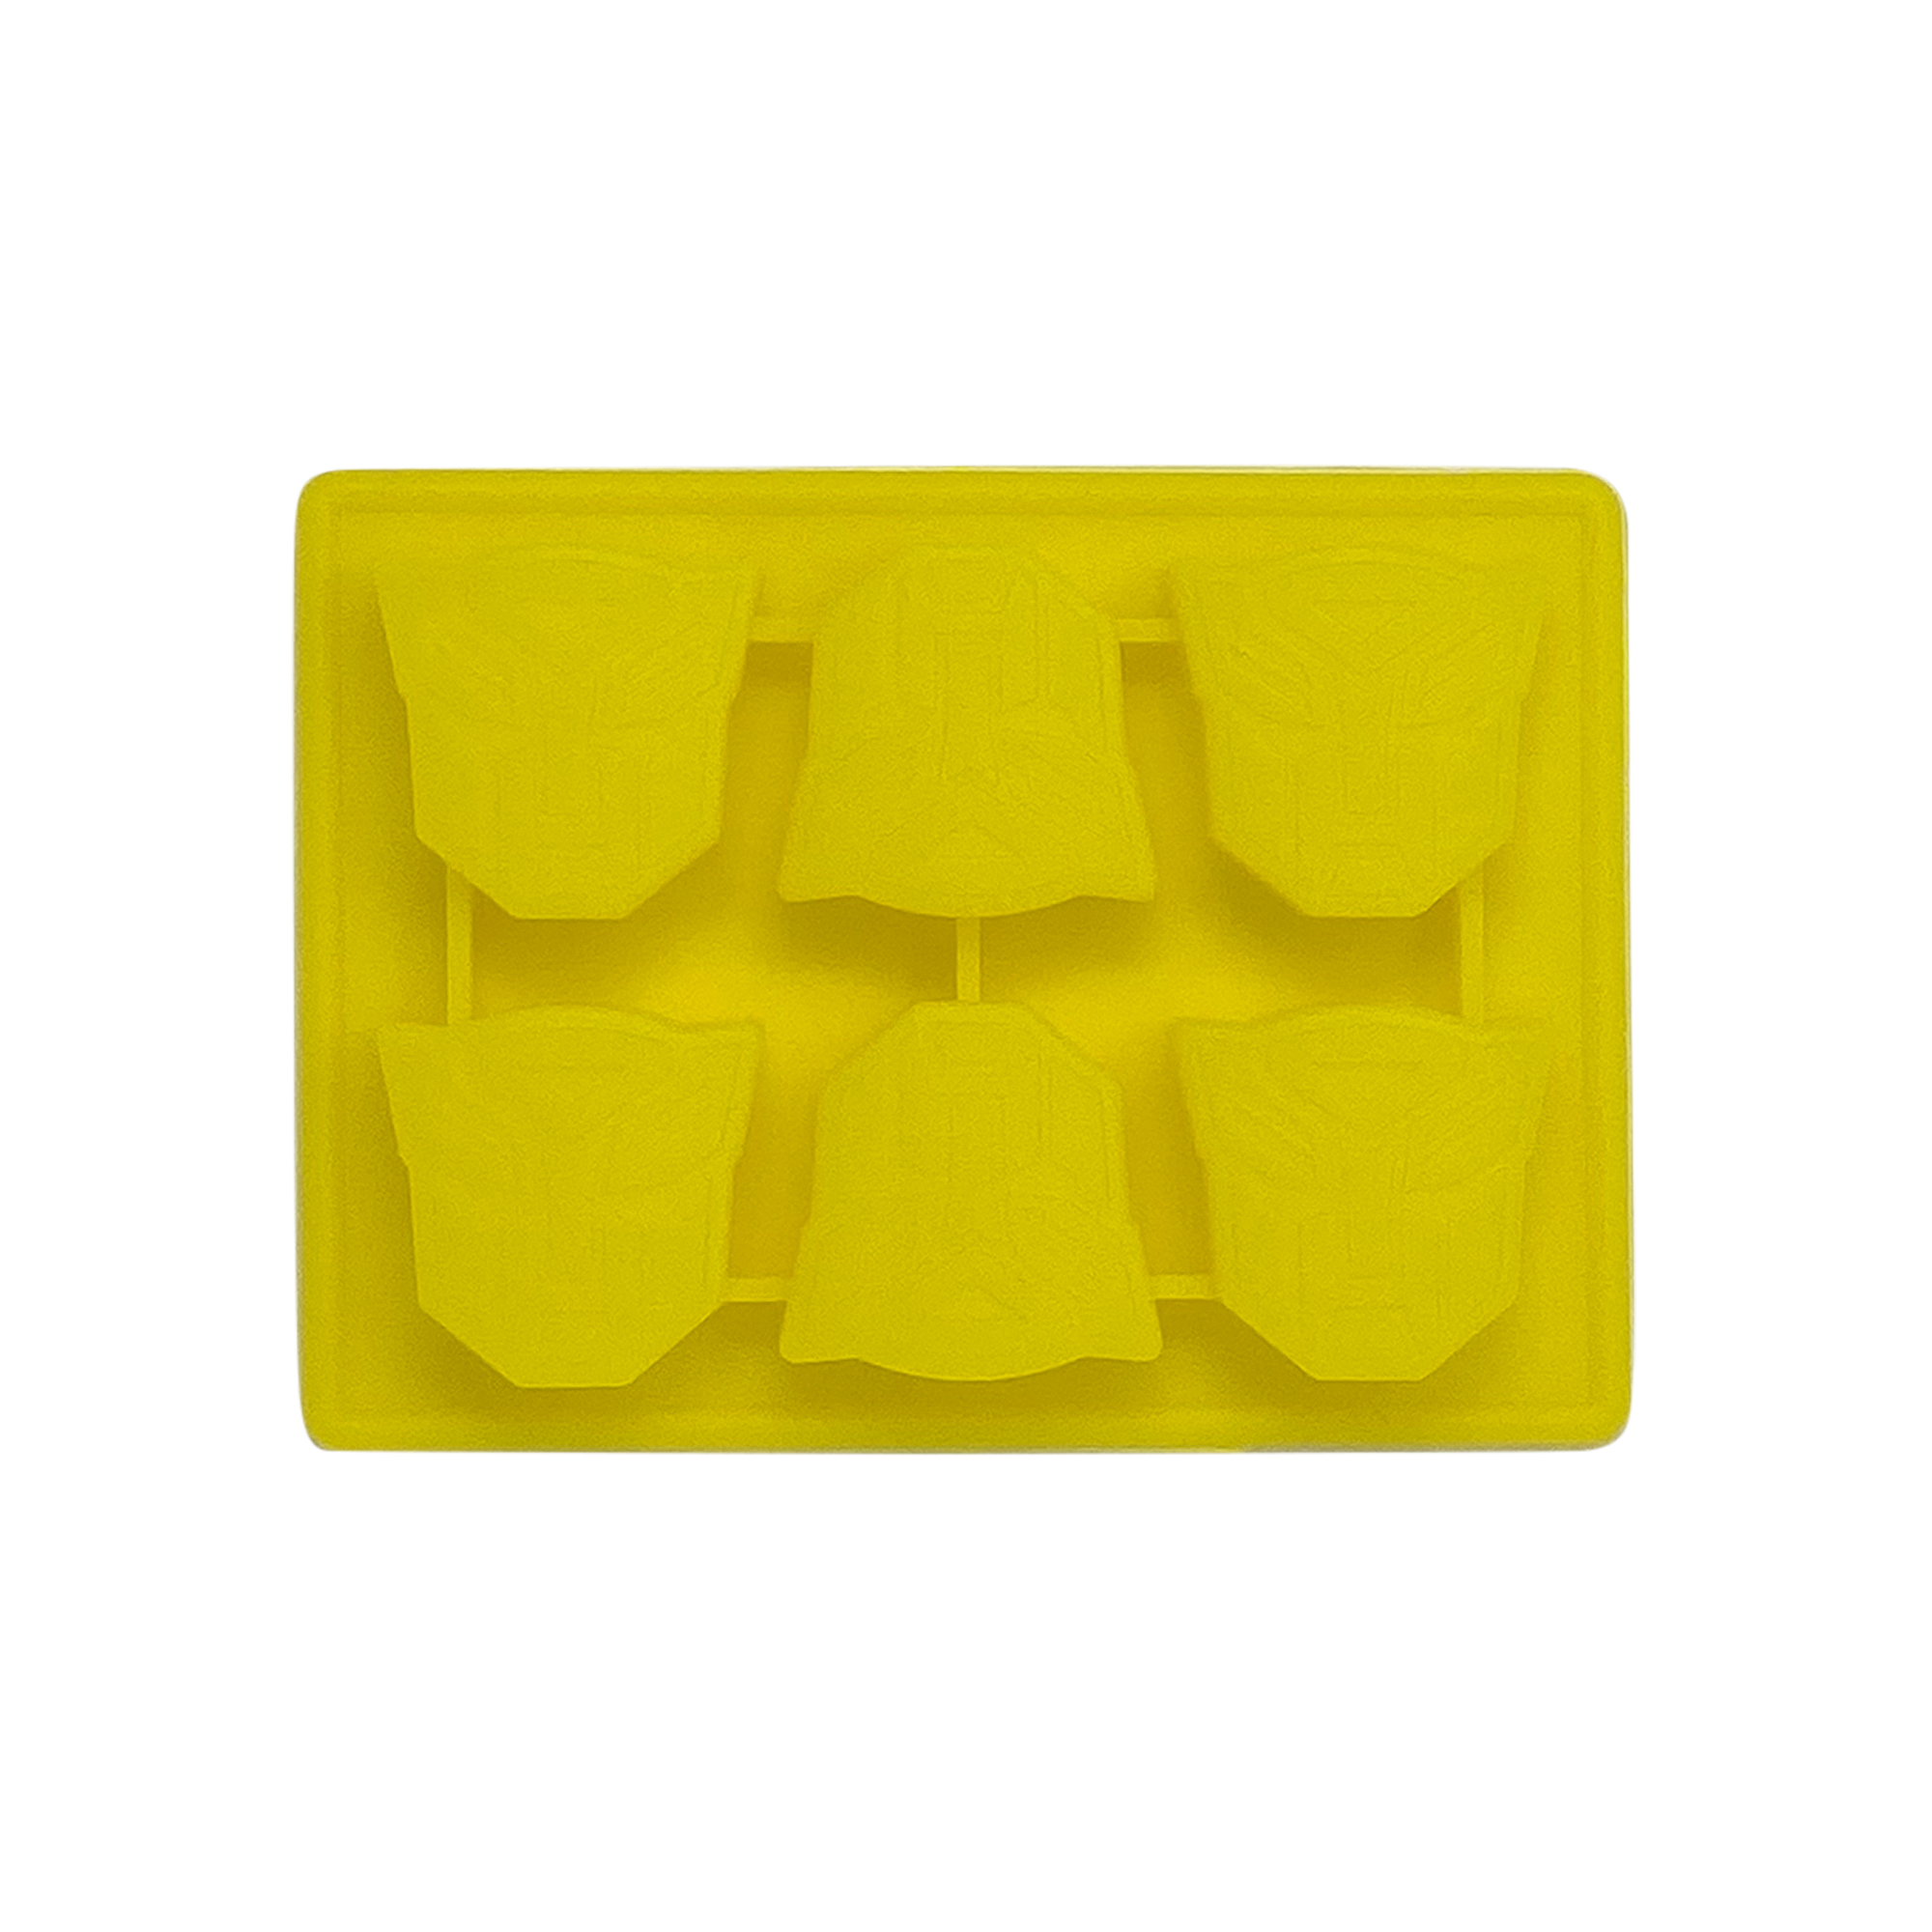 Ice Tray - Transformers Autobots - image 2 of 2